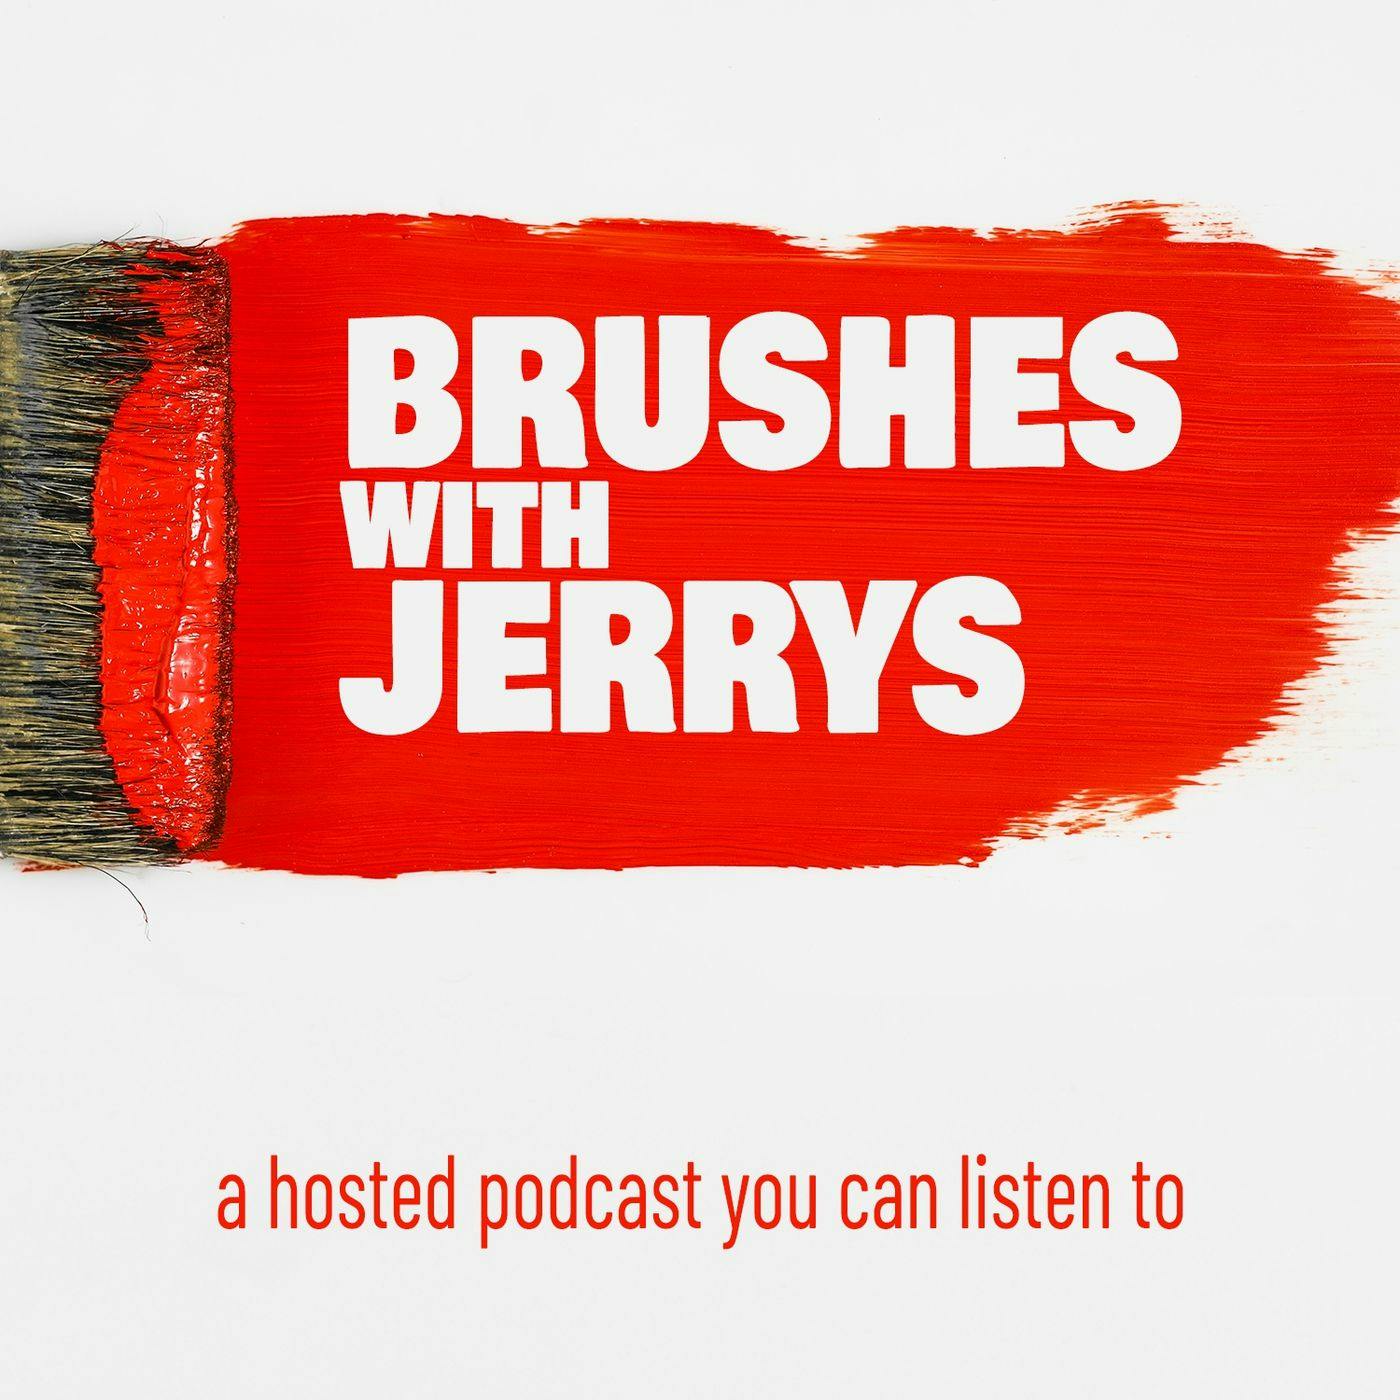 This is episode 2 of Brushes with Jerrys